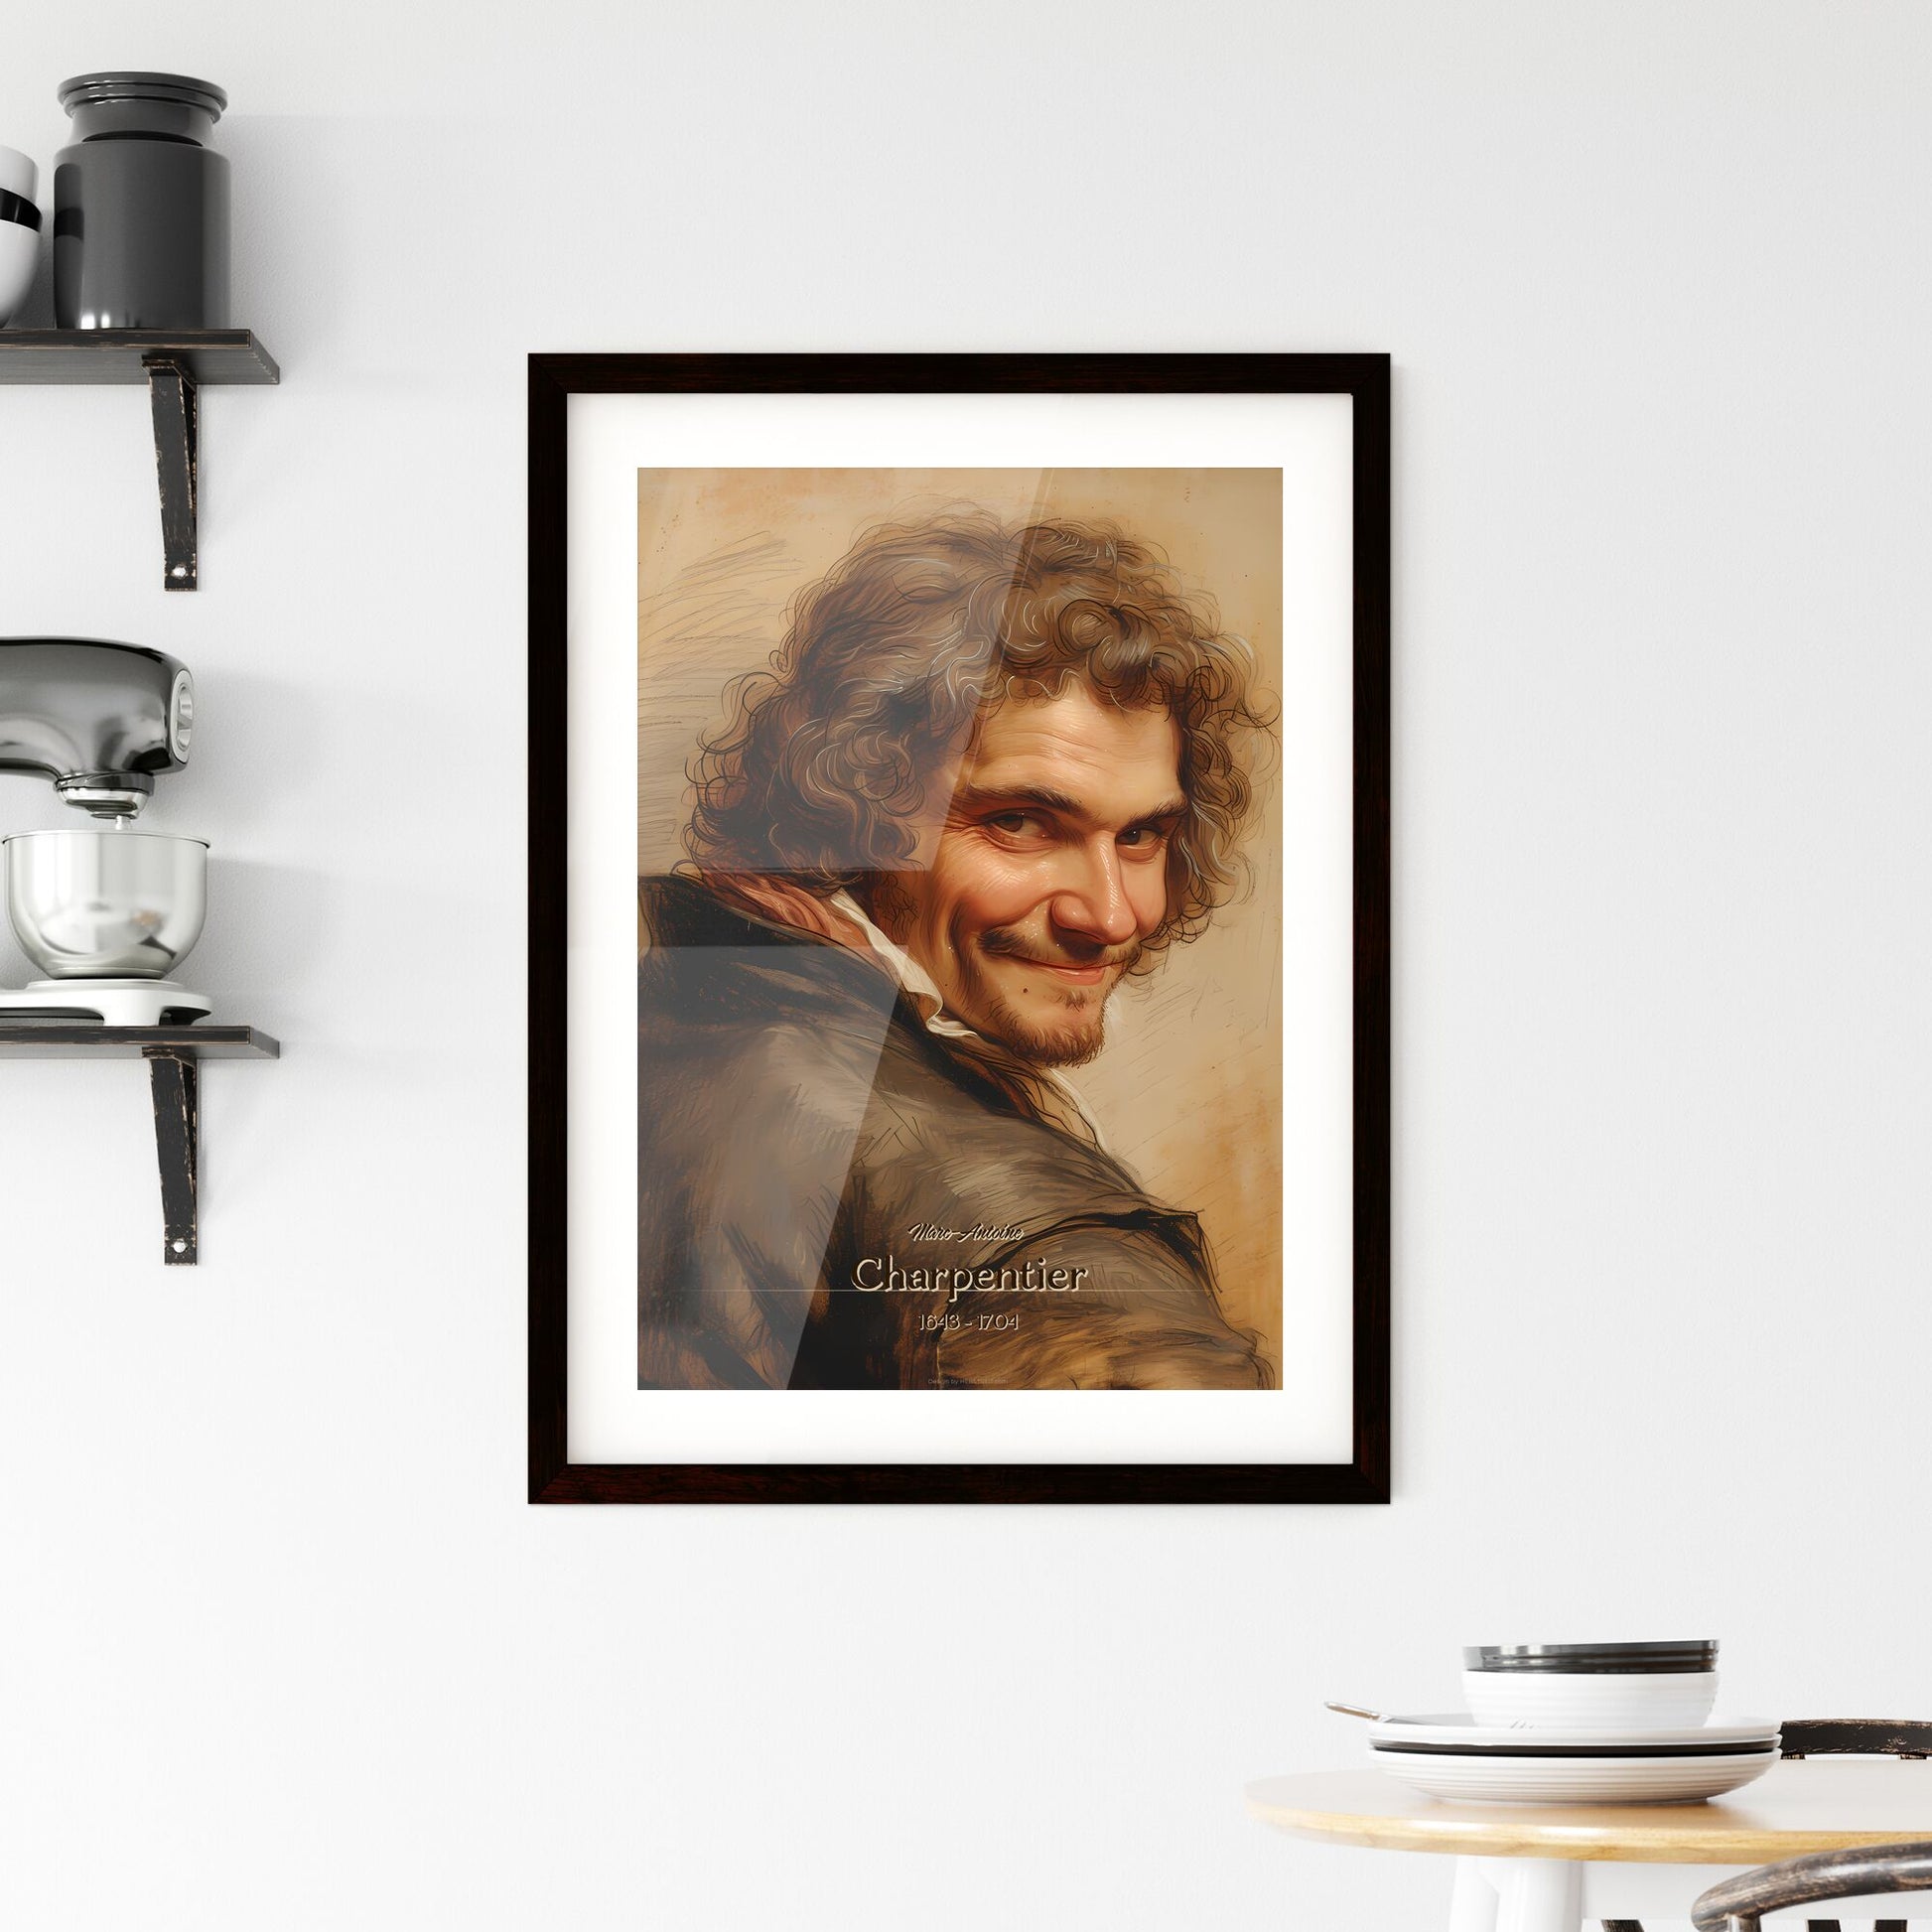 Marc-Antoine, Charpentier, 1643 - 1704, A Poster of a man with curly hair and beard smiling Default Title